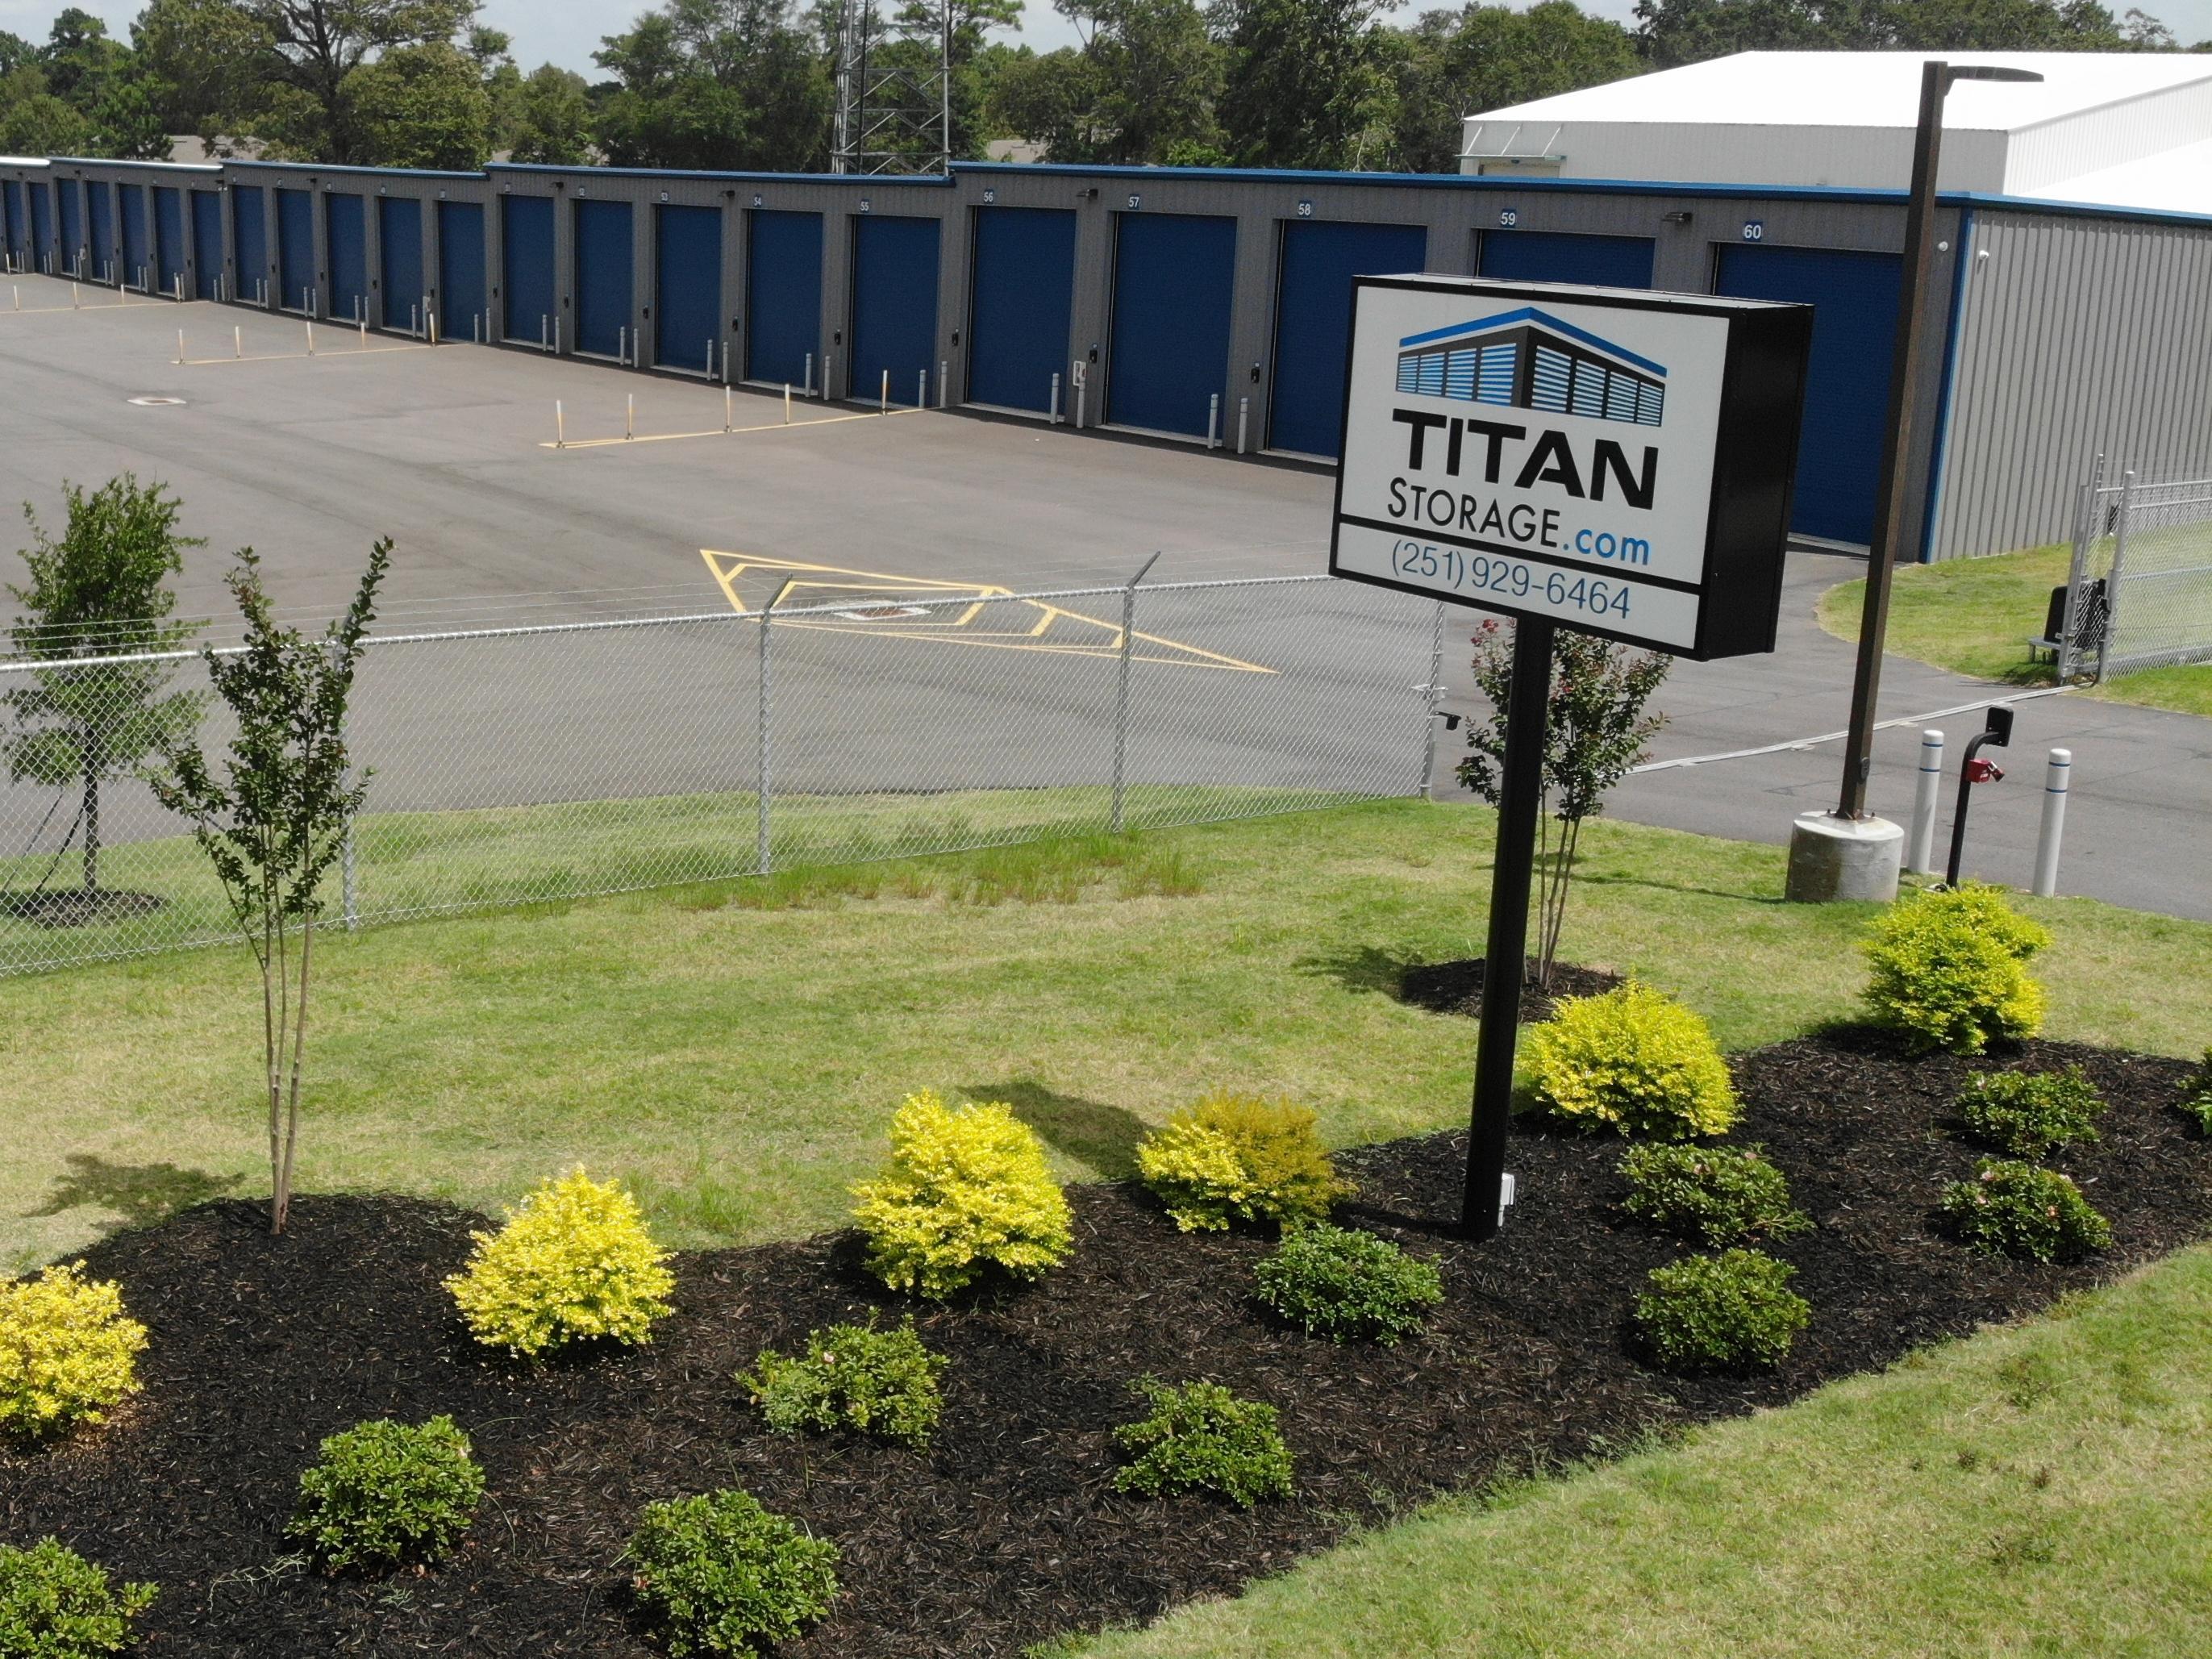 GET IN TOUCH WITH TITAN STORAGE FOR YOUR Mobile, AL SMALL BUSINESS STORAGE UNIT SOLUTION